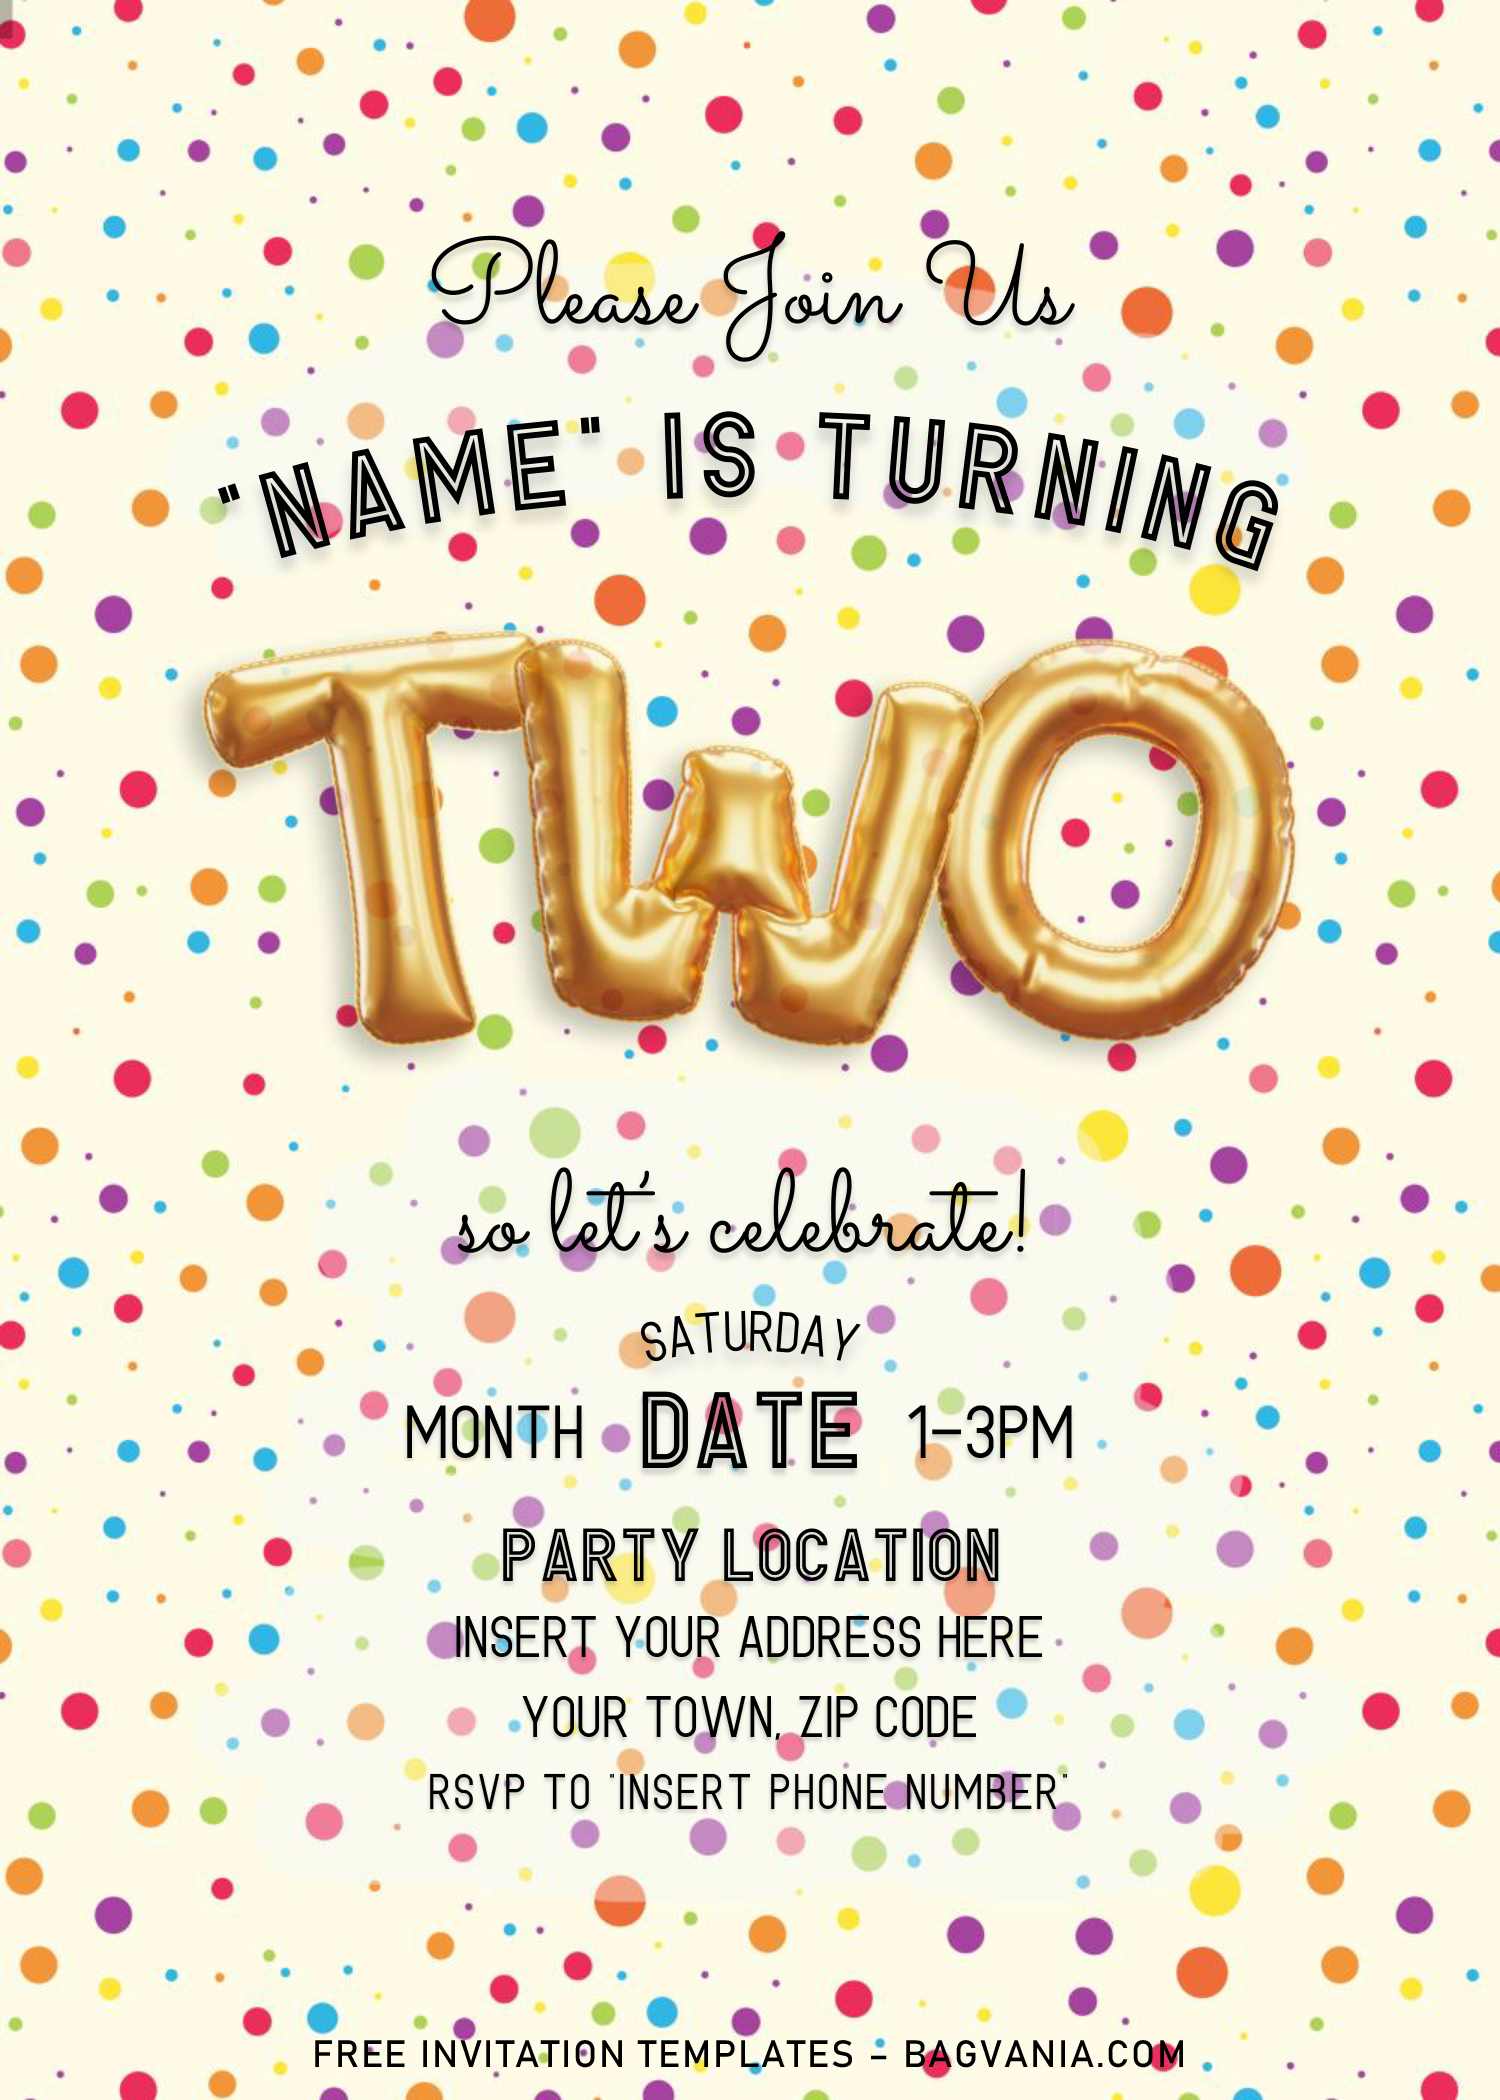 Free Balloons Themed Birthday Invitation Templates For Word | FREE